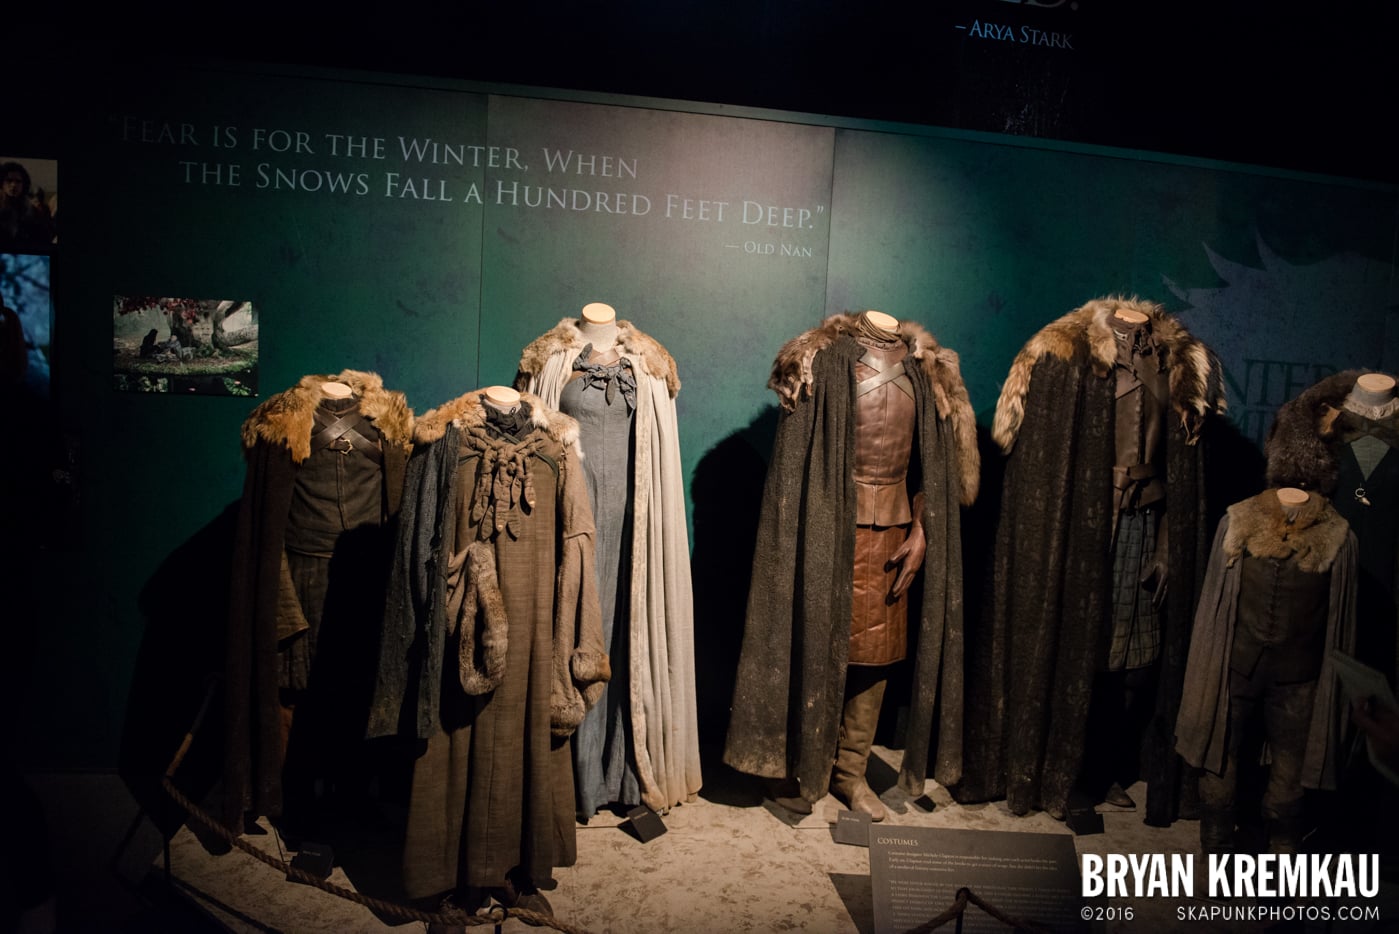 Game Of Thrones Exhibition @ New York, NY - 3.29.13 (40)